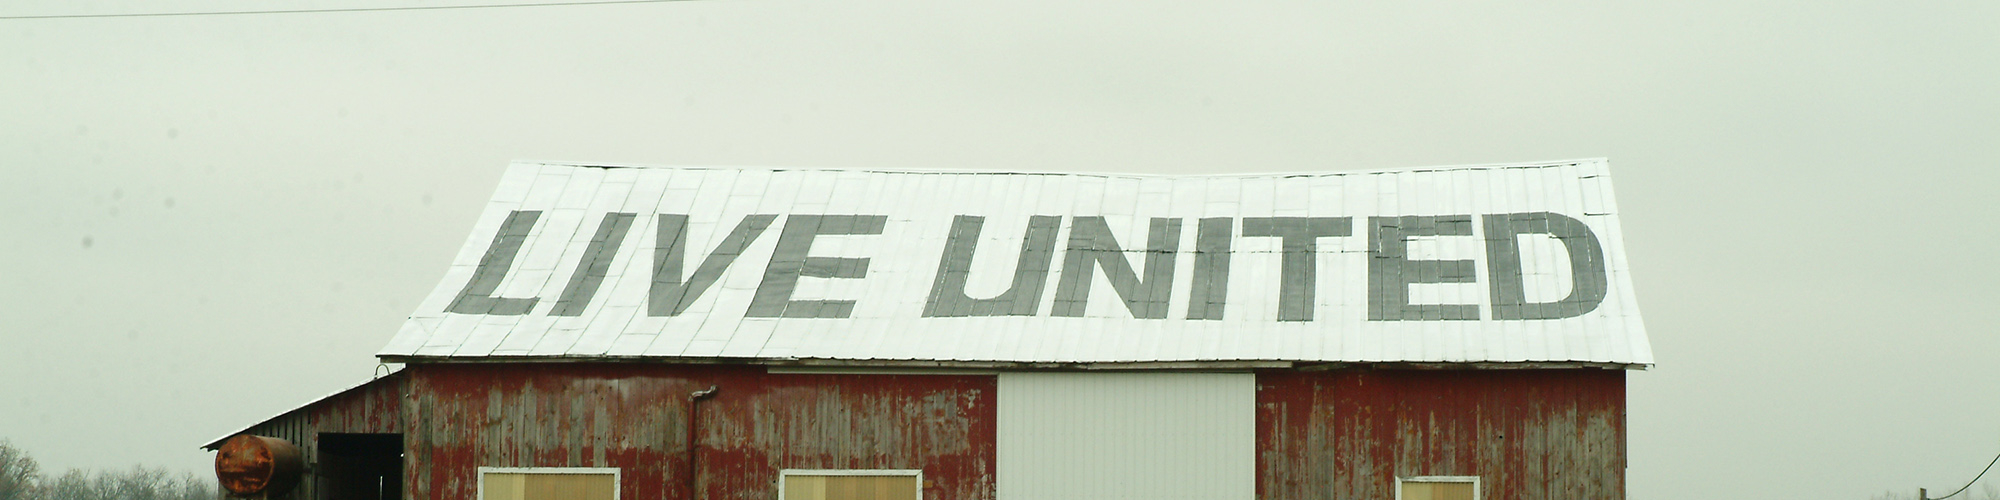 Live United written on the roof of a barn